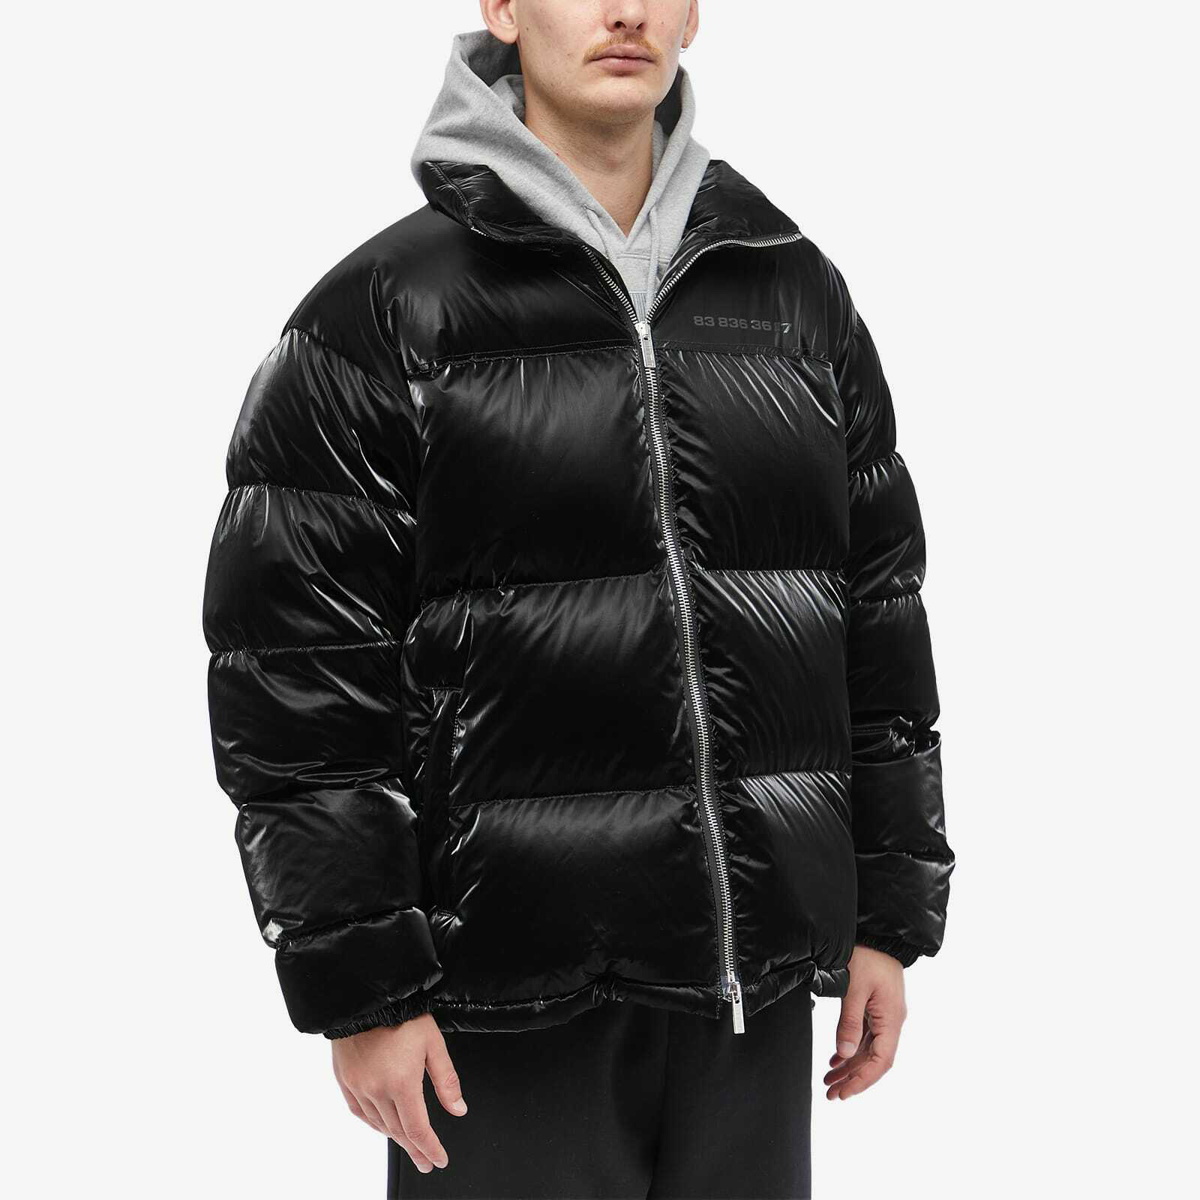 VTMNTS Cropped Puffer Jacket in Black